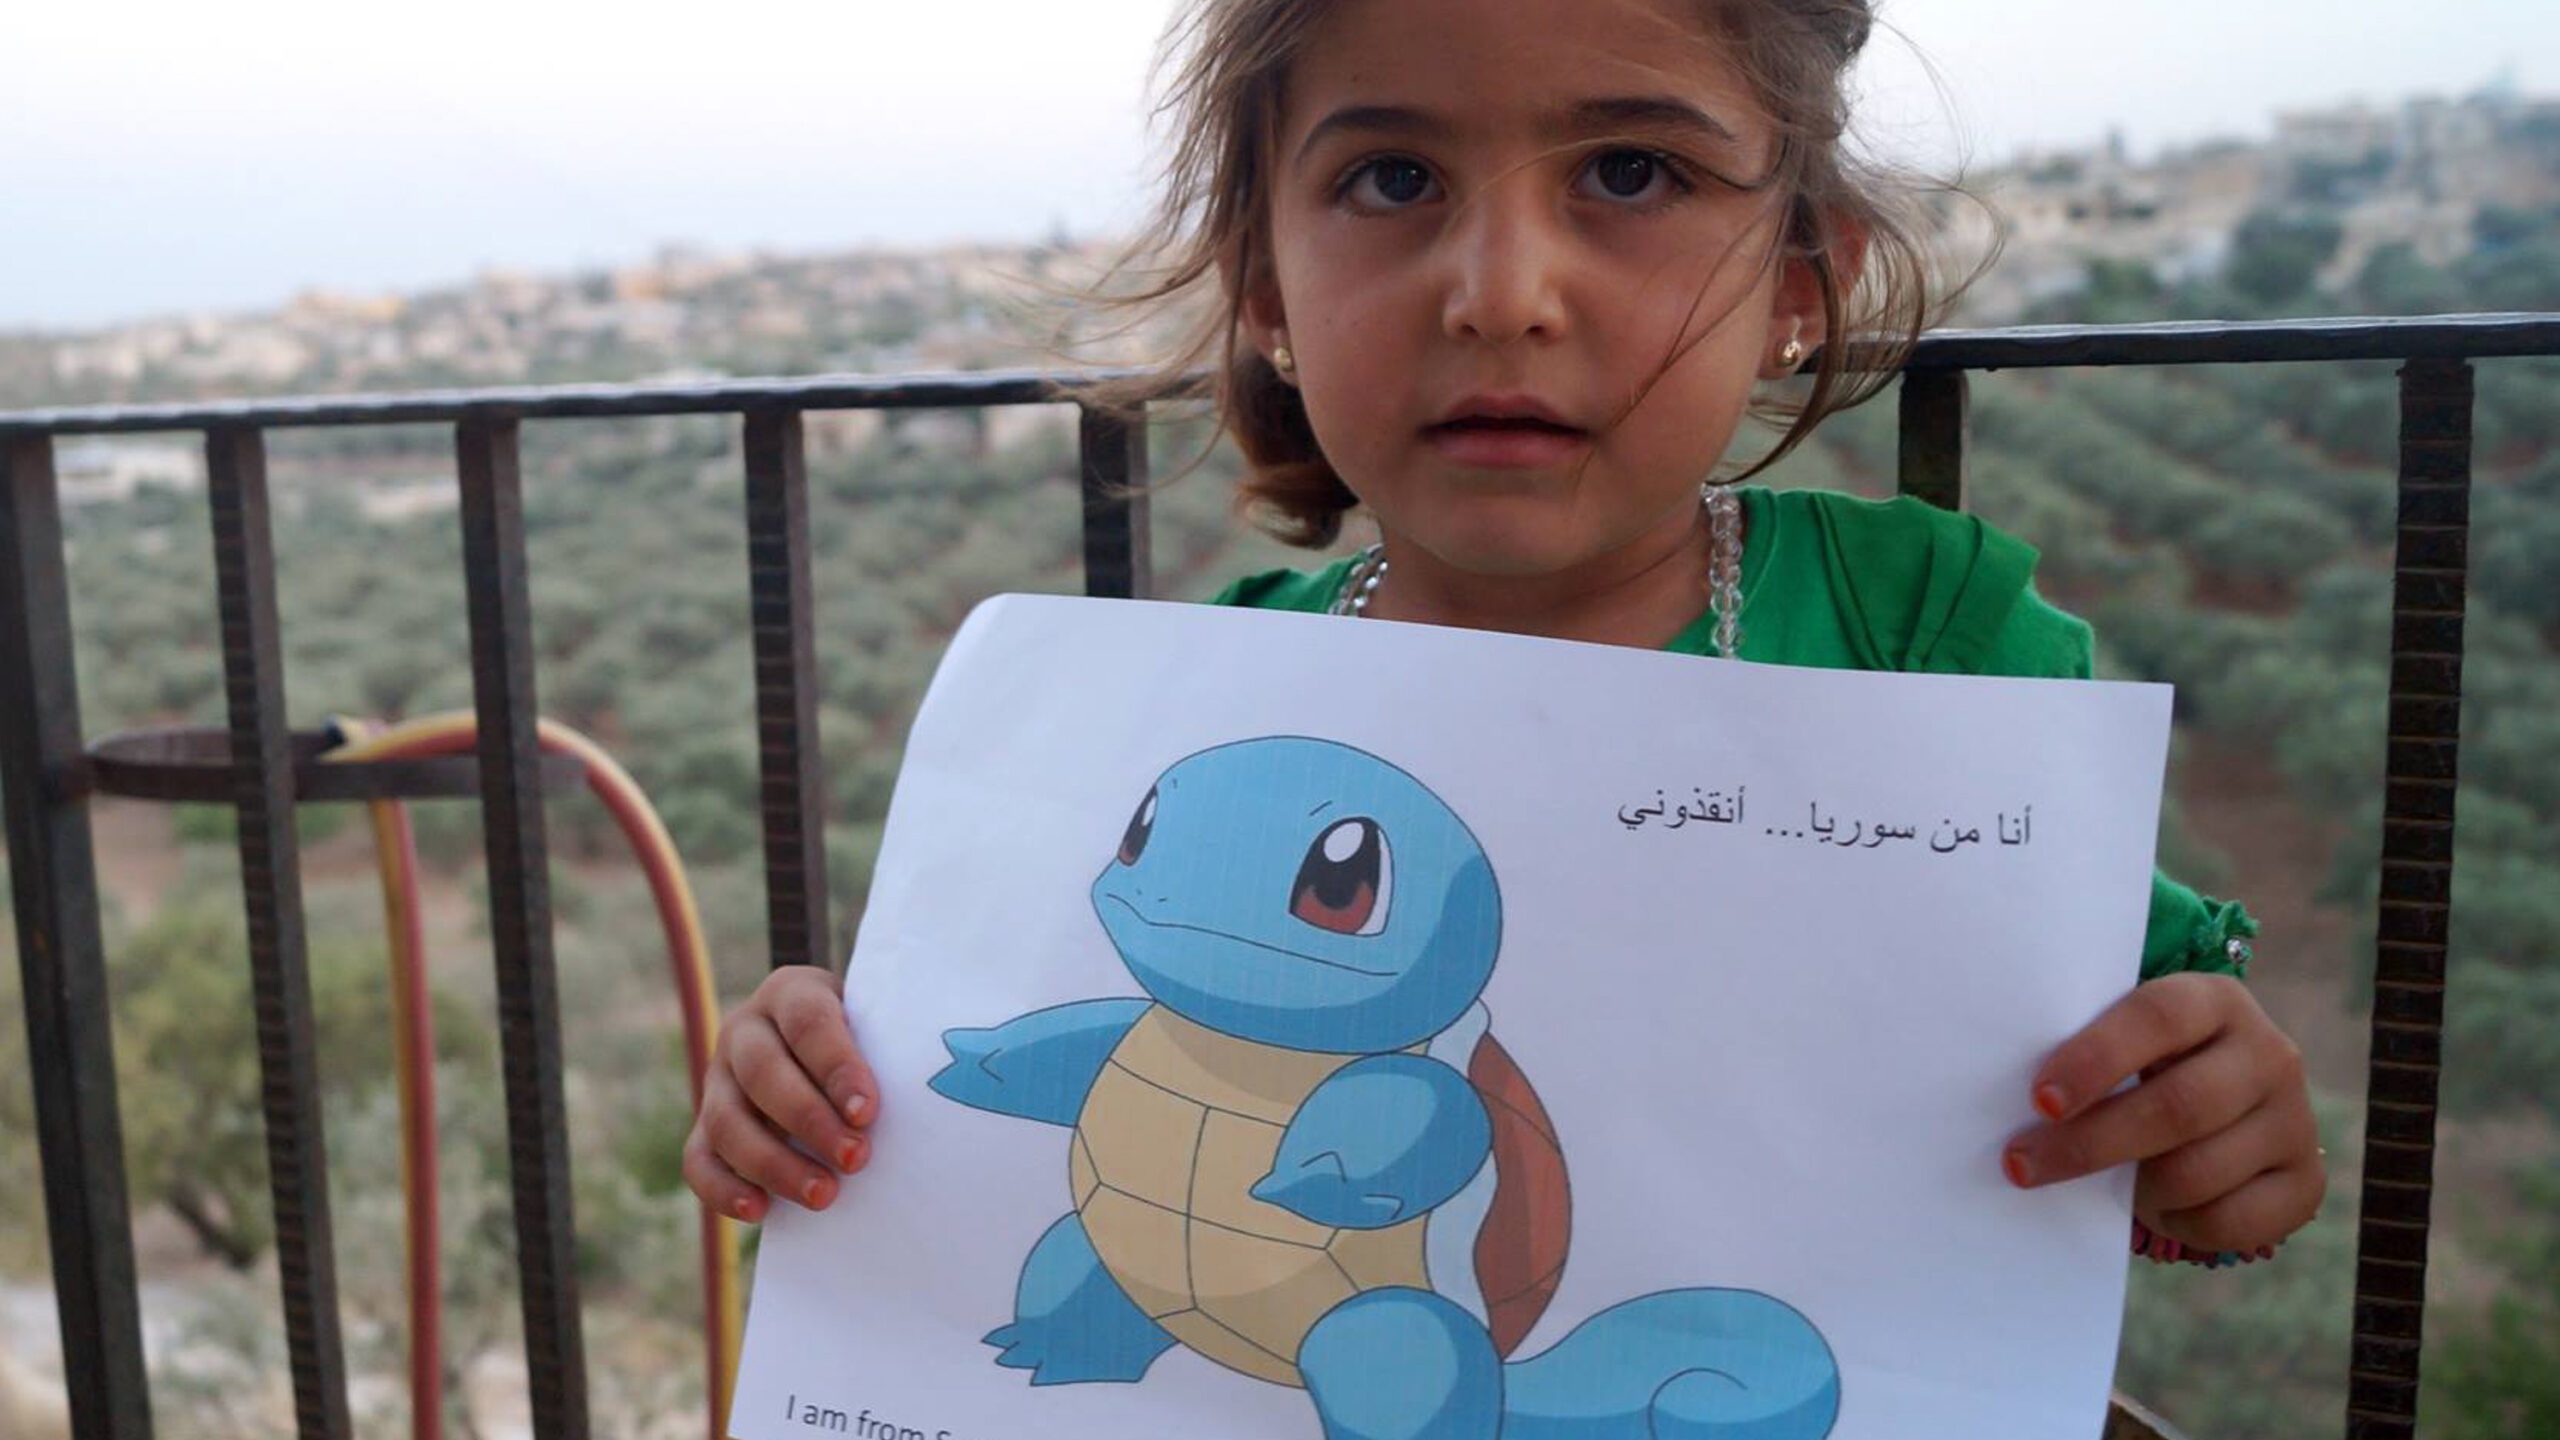 Syrians harness Pokemon frenzy to depict their plight